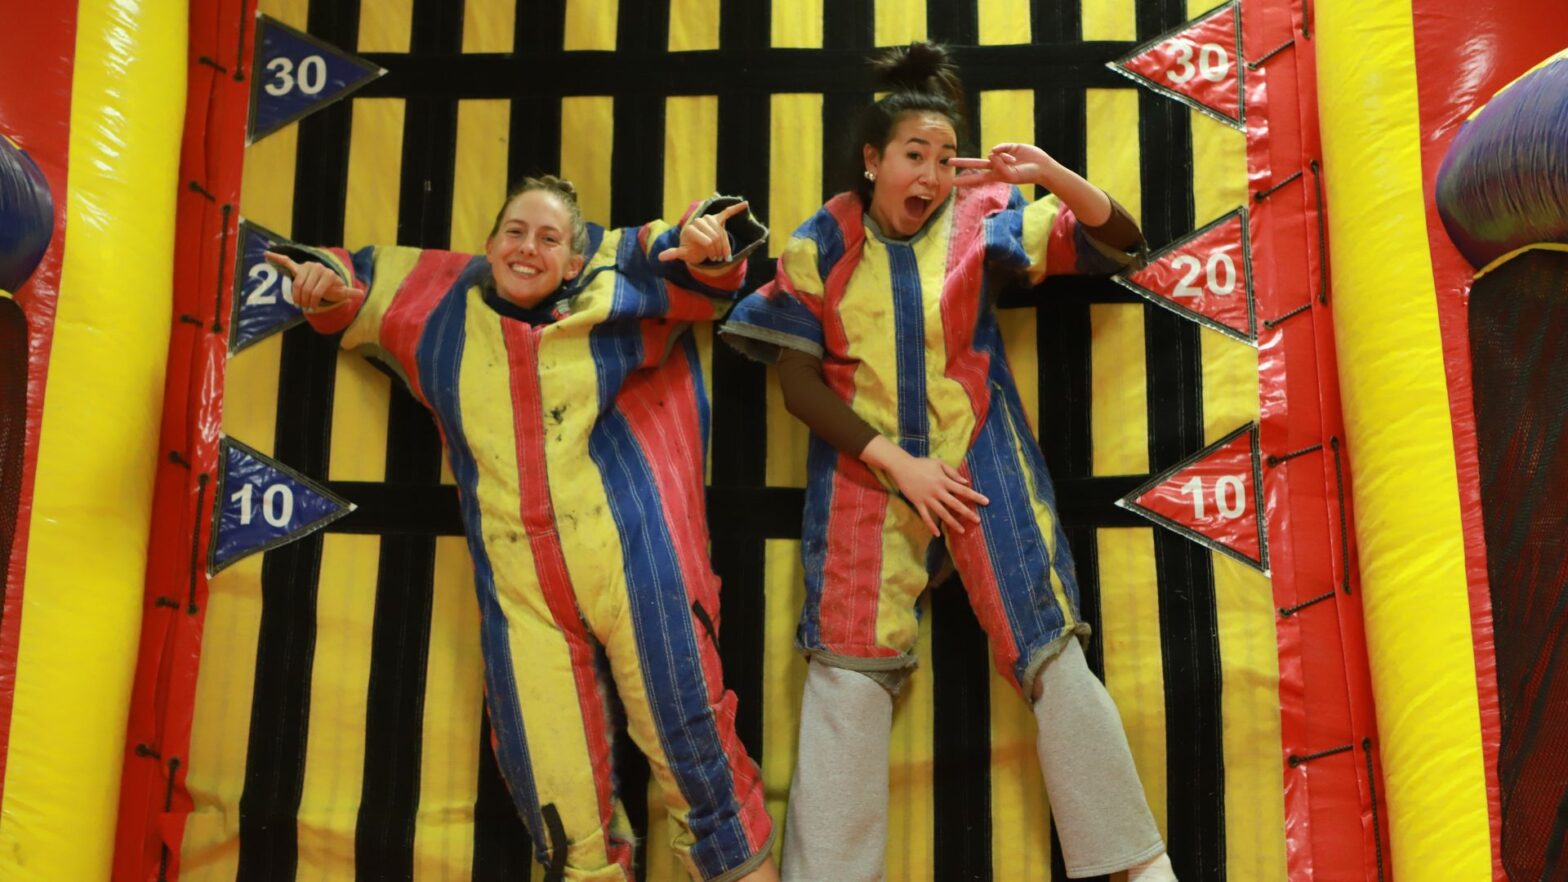 Two students wear yellow, red and blue-striped VELCRO outfits as they stick to an inflatable VELCRO wall.